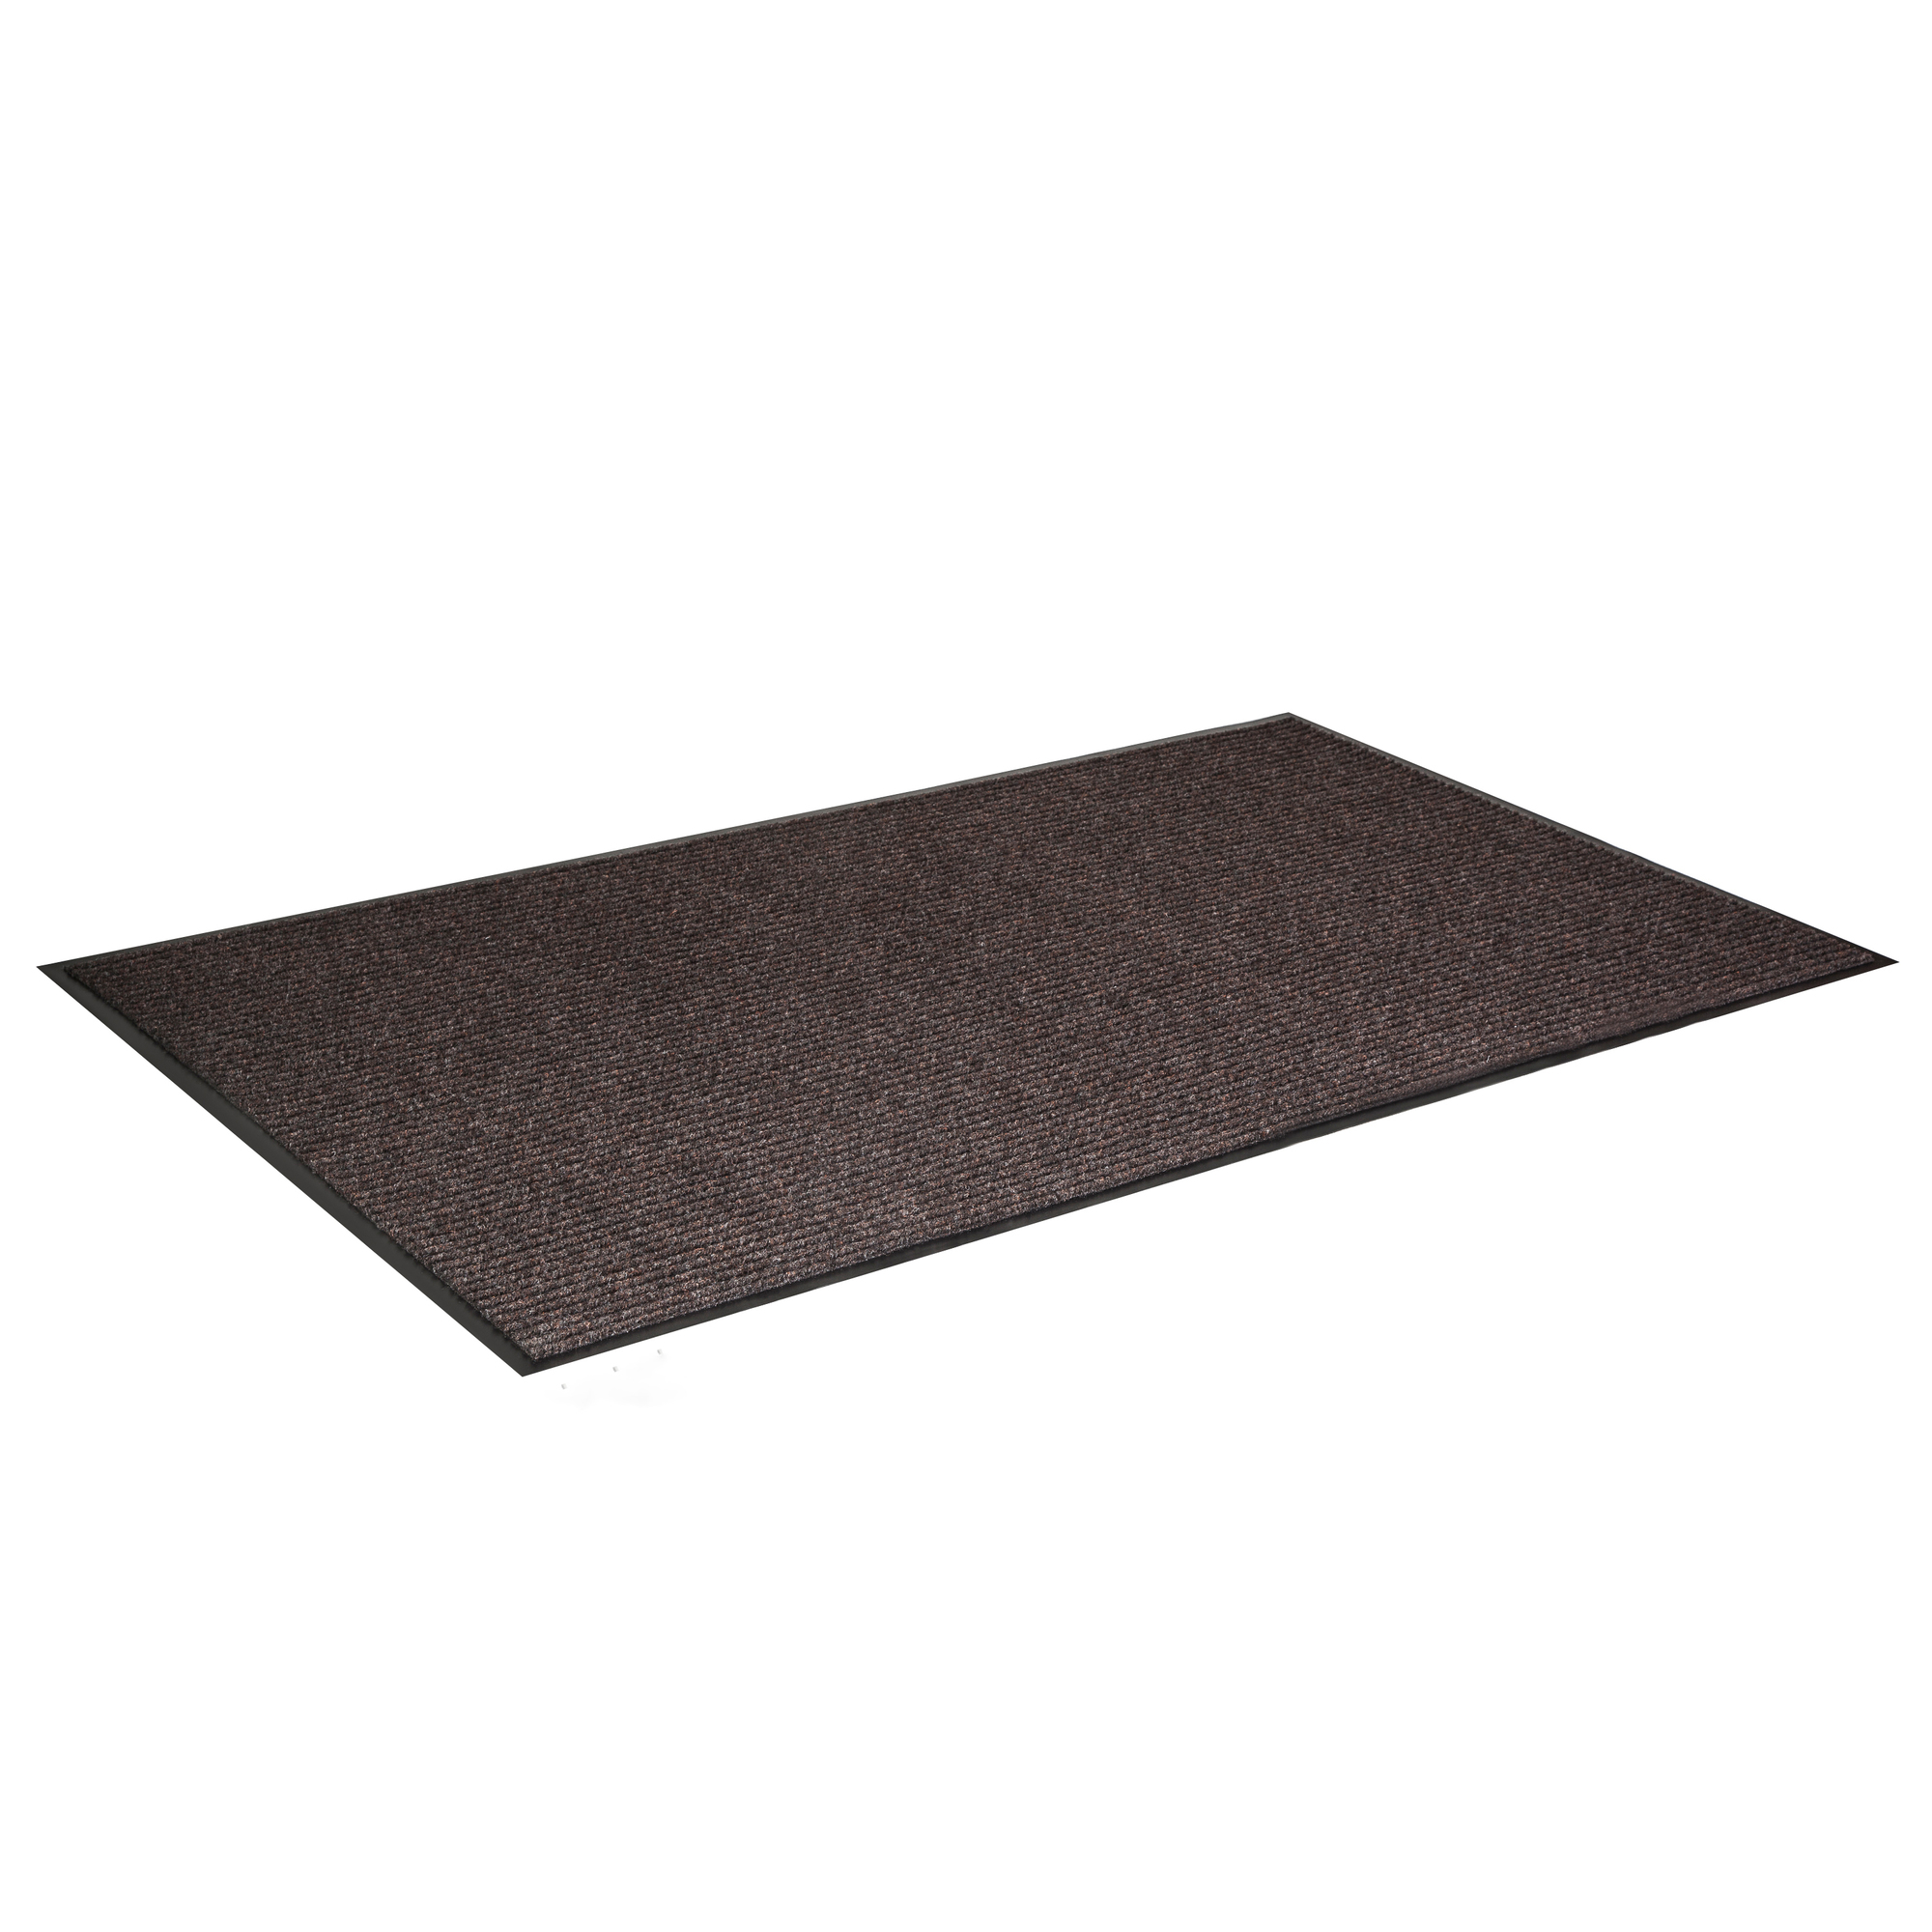 Crown Matting Technologies, Needle-Rib 3ft.x10ft. Brown, Width 36 in, Length 120 in, Thickness 5/16 in, Model NR 0310BR